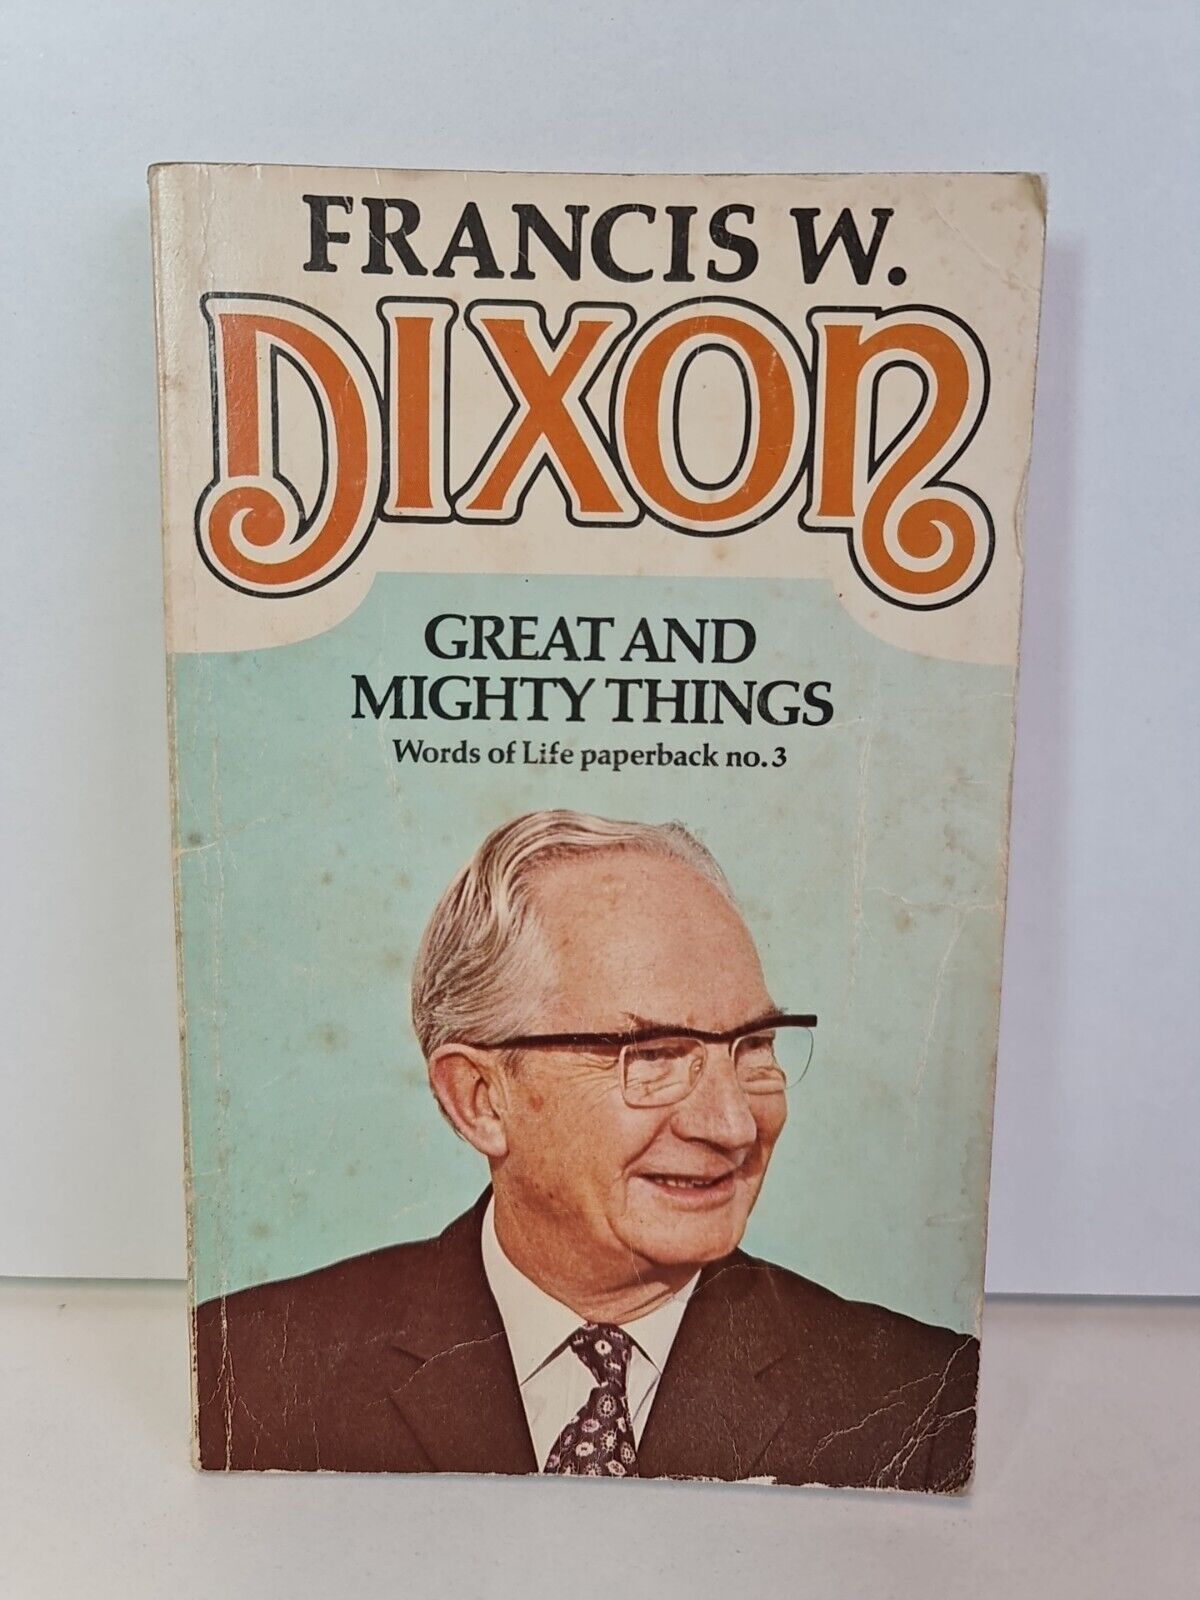 Great and Mighty Things by Francis W. Dixon (1976)